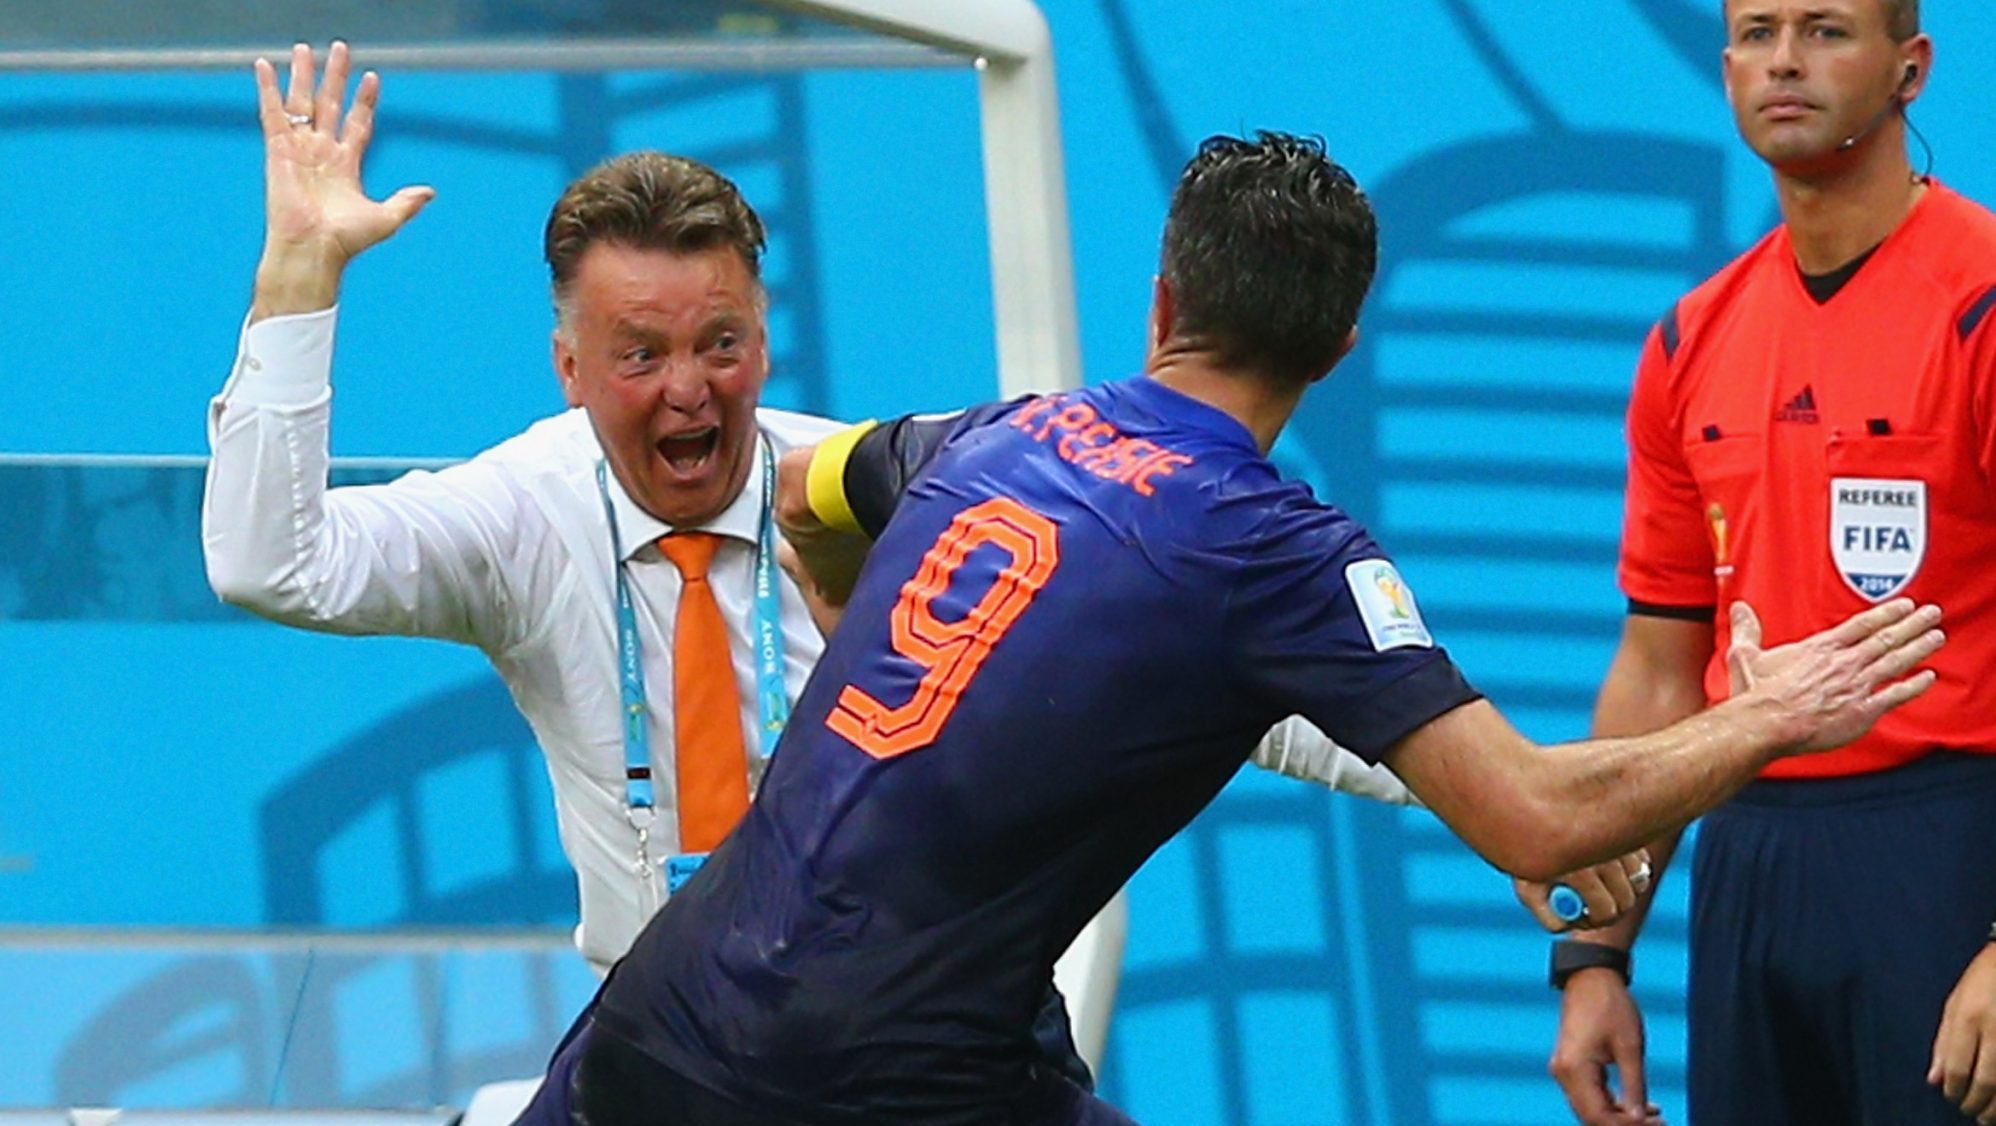 Louis van Gaal celebrates with Robin van Persie of the Netherlands during the 2014 World Cup finals. The Dutch came third in the tournament but have failed to qualify for the 2016 Euros and 2018 World Cup since.